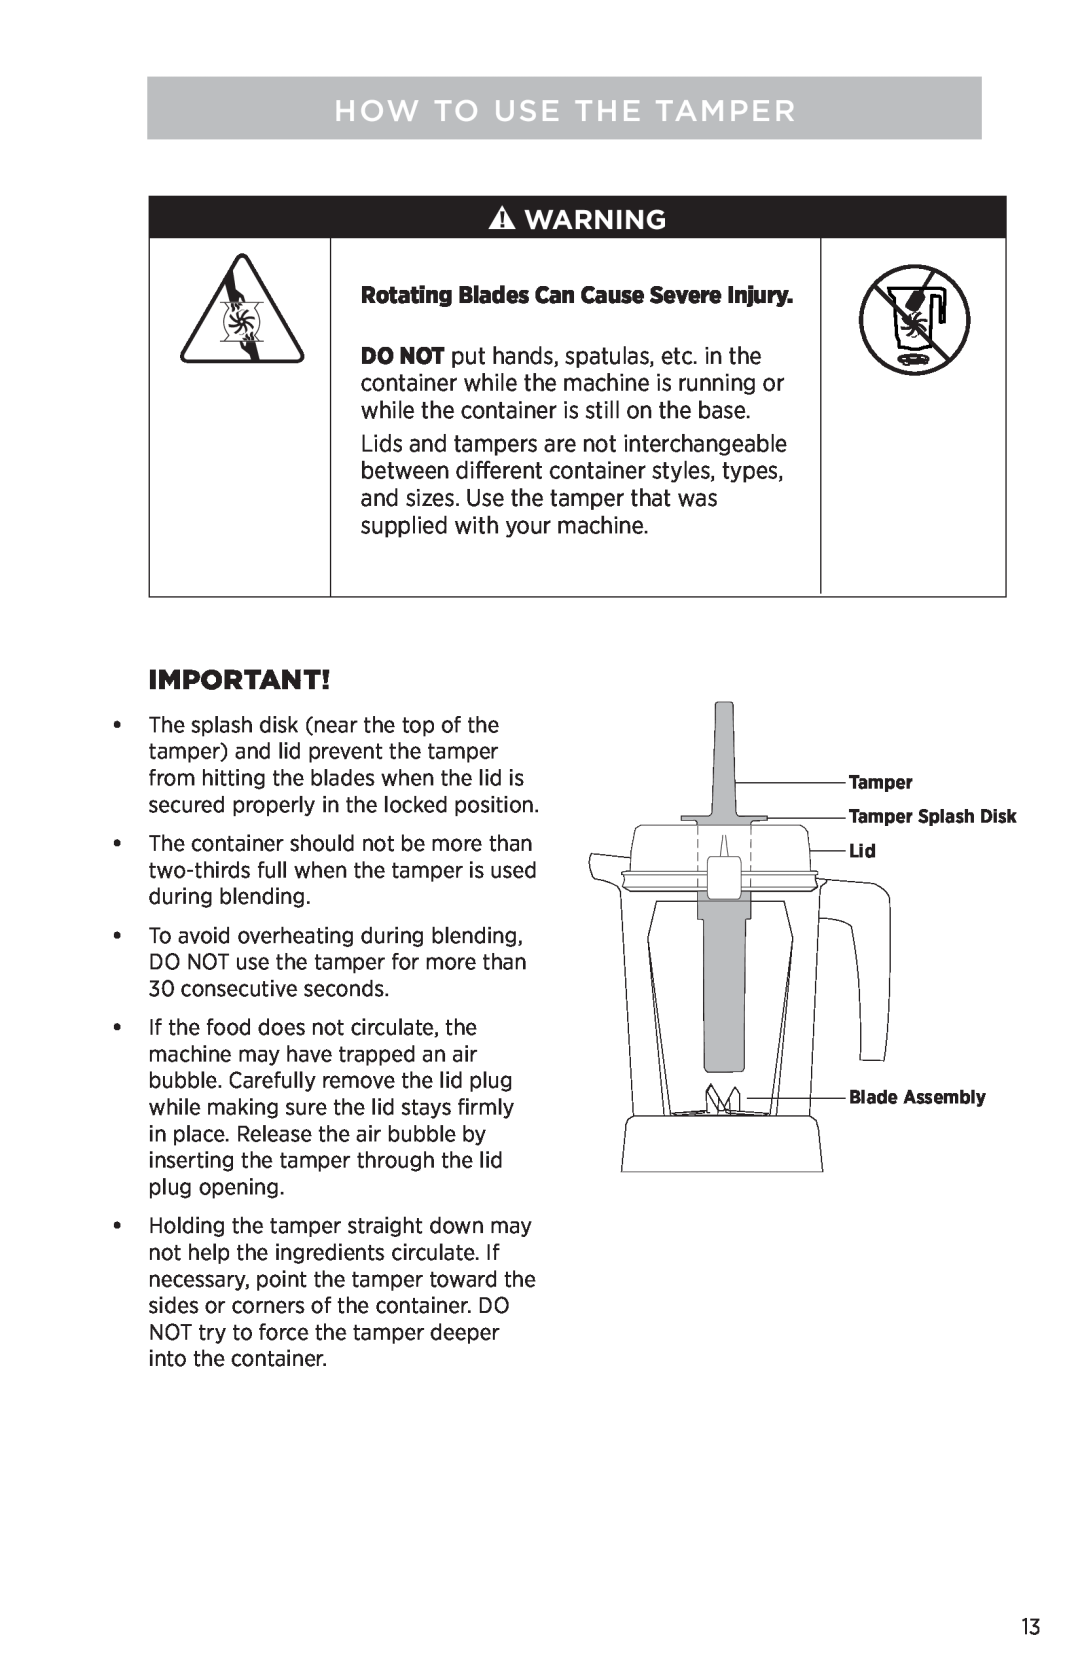 Vita-Mix PROFESSIONAL SERIES 750 manual How To Use The Tamper, Rotating Blades Can Cause Severe Injury 